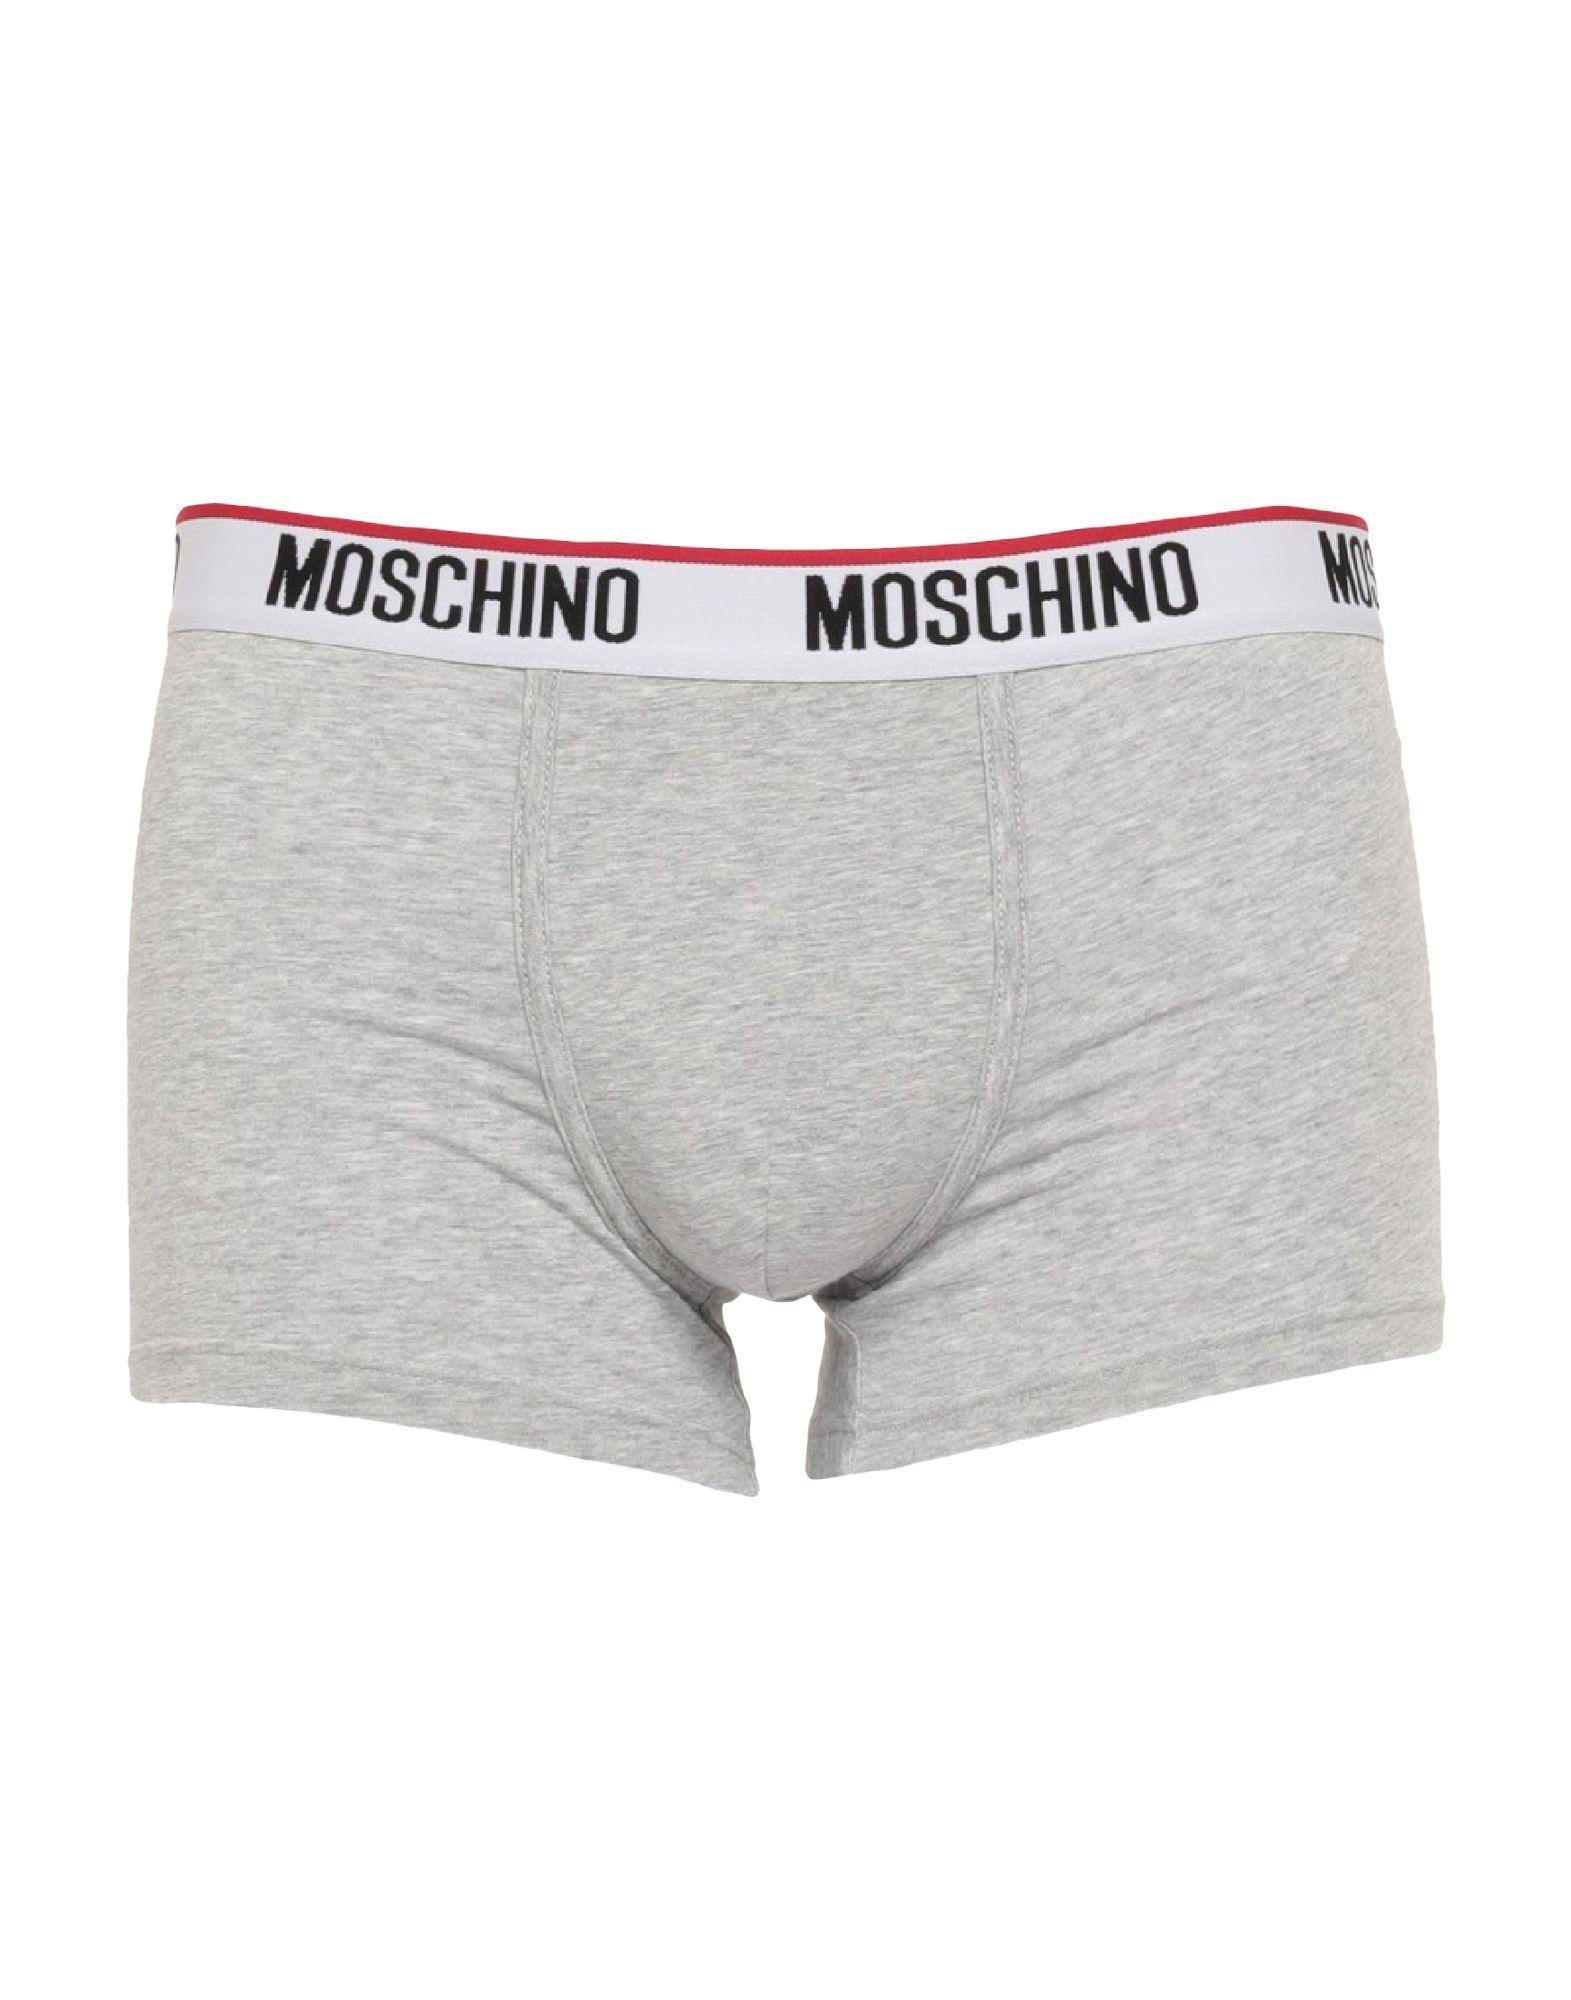 Moschino Boxer in Light Grey (Gray) for Men - Lyst